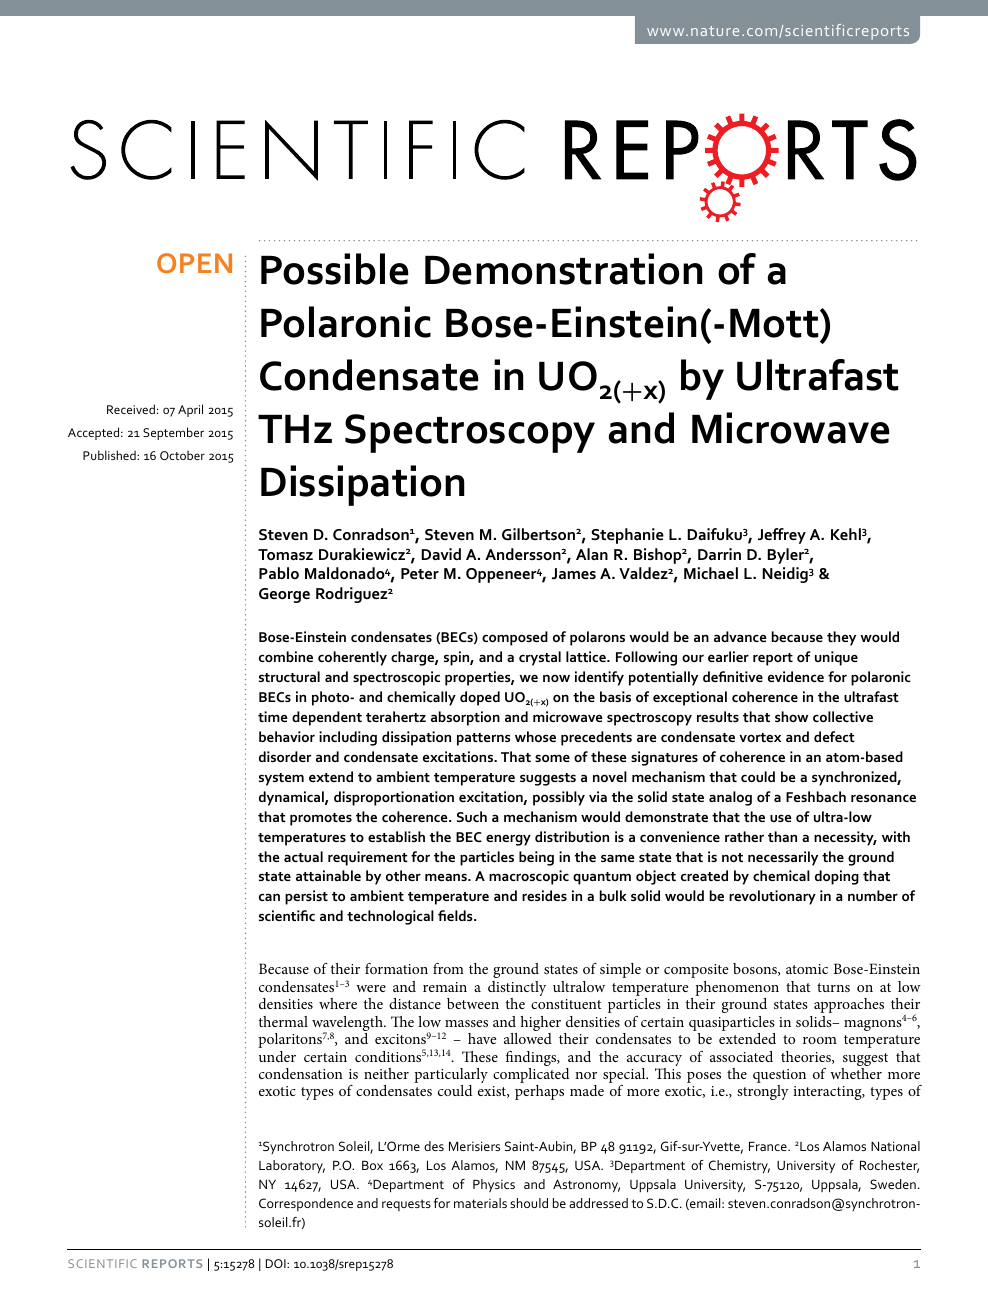 Possible Demonstration Of A Polaronic Bose Einstein Mott Condensate In Uo2 X By Ultrafast Thz Spectroscopy And Microwave Dissipation Topic Of Research Paper In Physical Sciences Download Scholarly Article Pdf And Read For Free